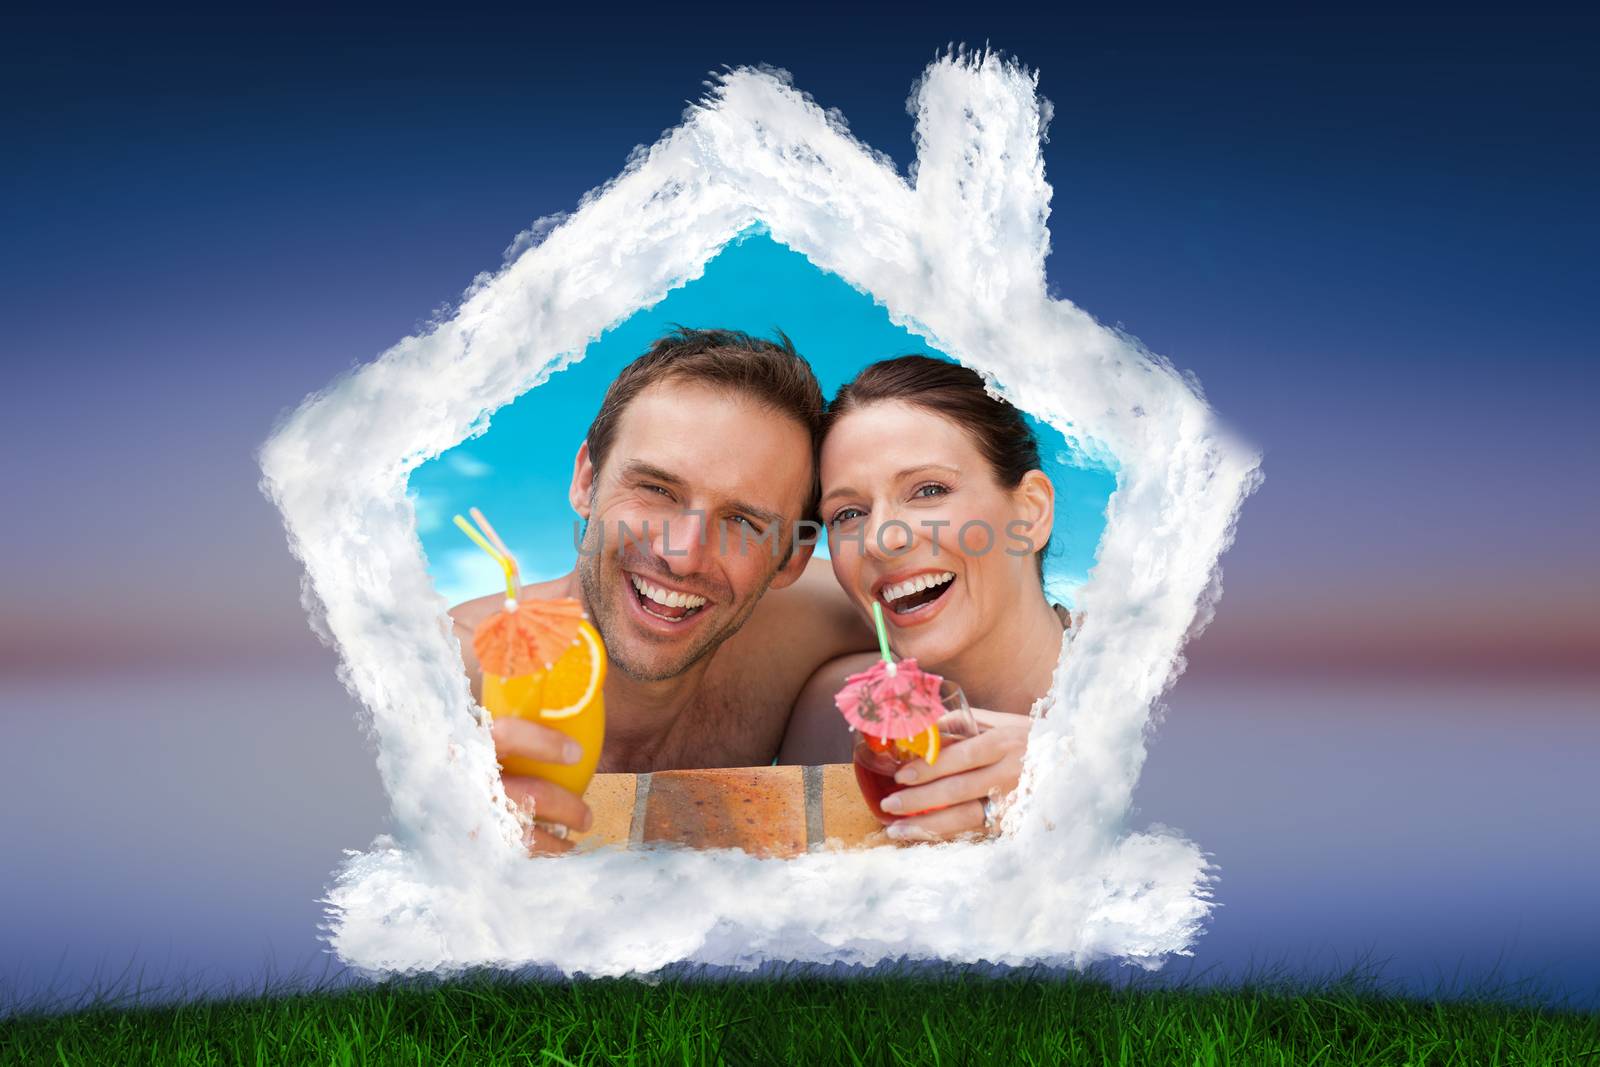 Beautiful couple drinking cocktails in the swimming pool against green grass under blue and purple sky